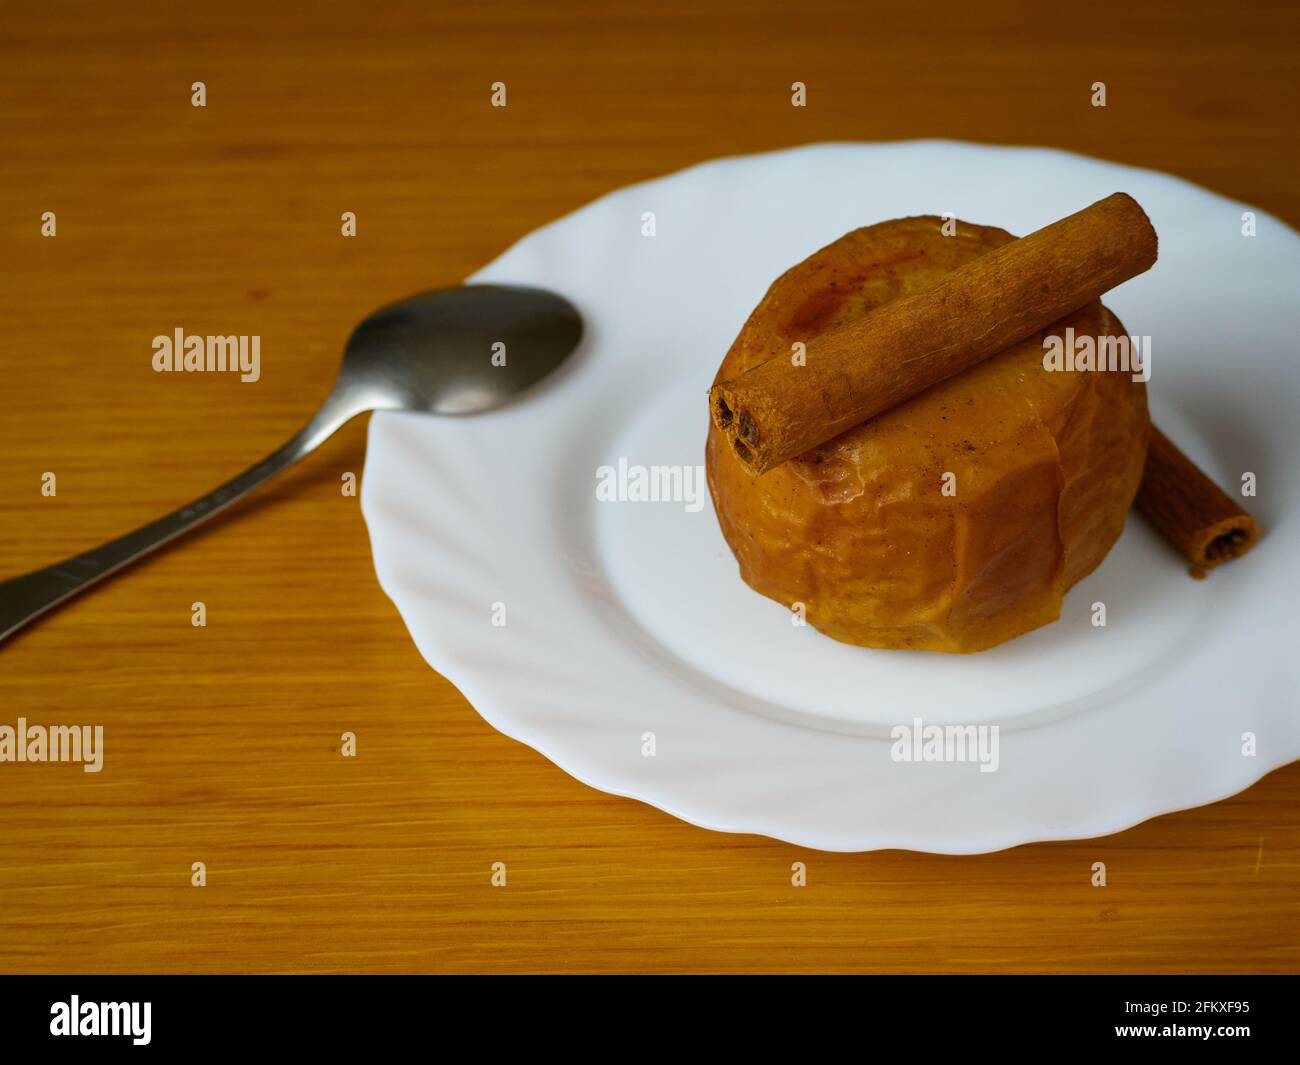 Baked Apple decorated with cinnamon sticks and a metal spoon on a plate and wooden background Stock Photo